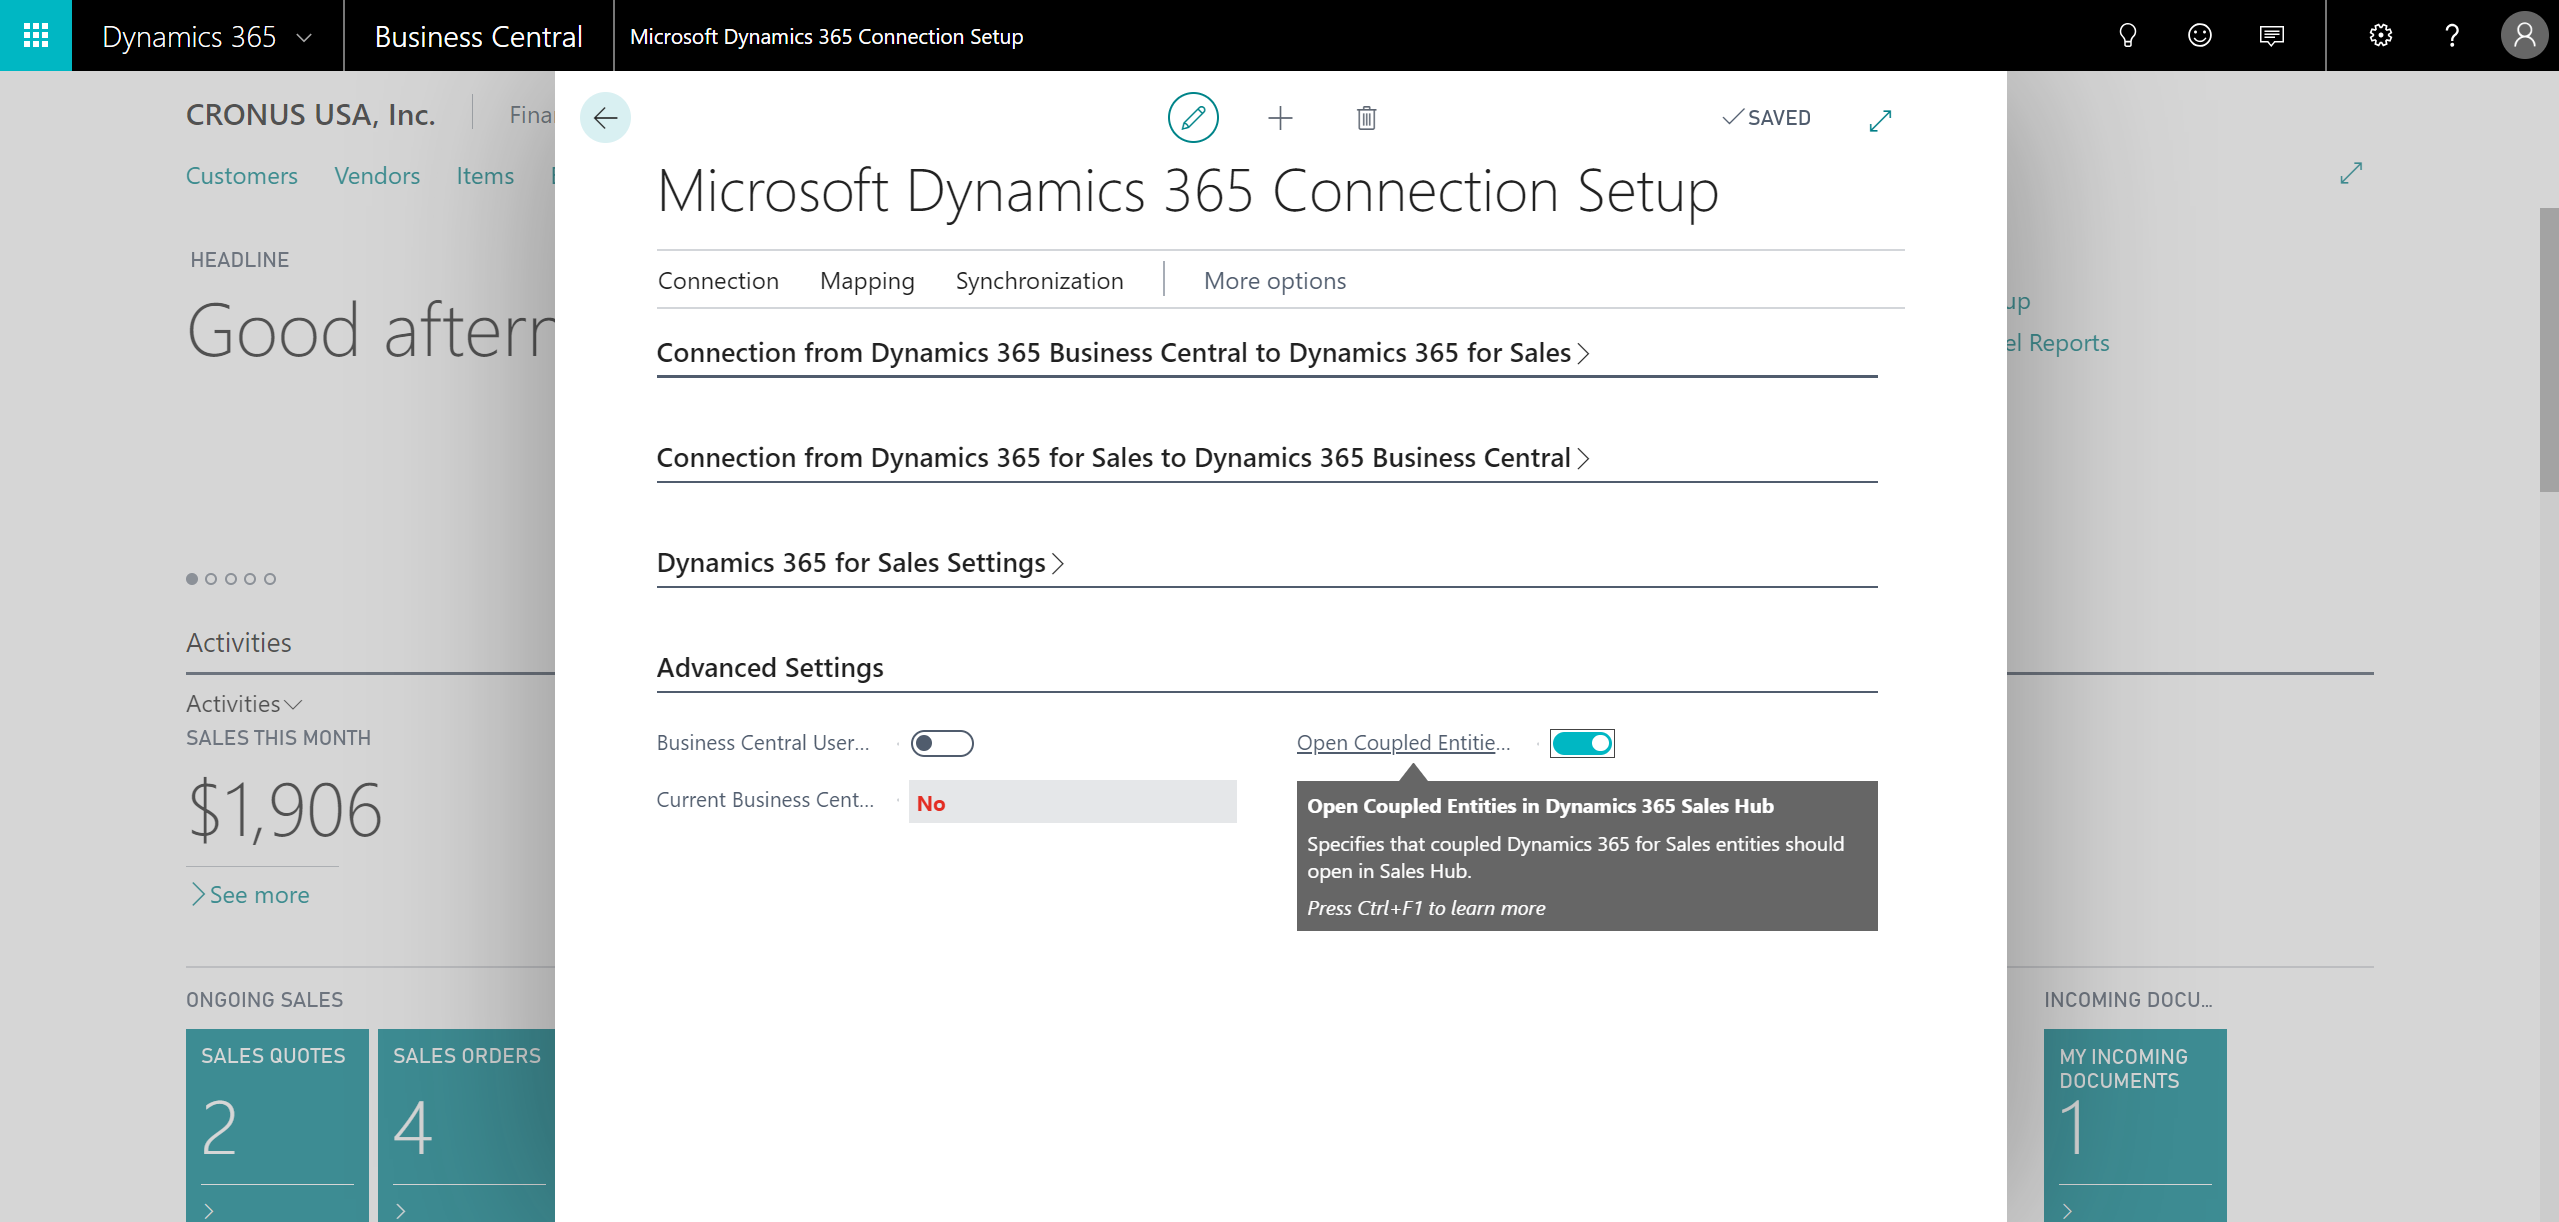 Open Coupled Entities in Dynamics 365 Sales Hub